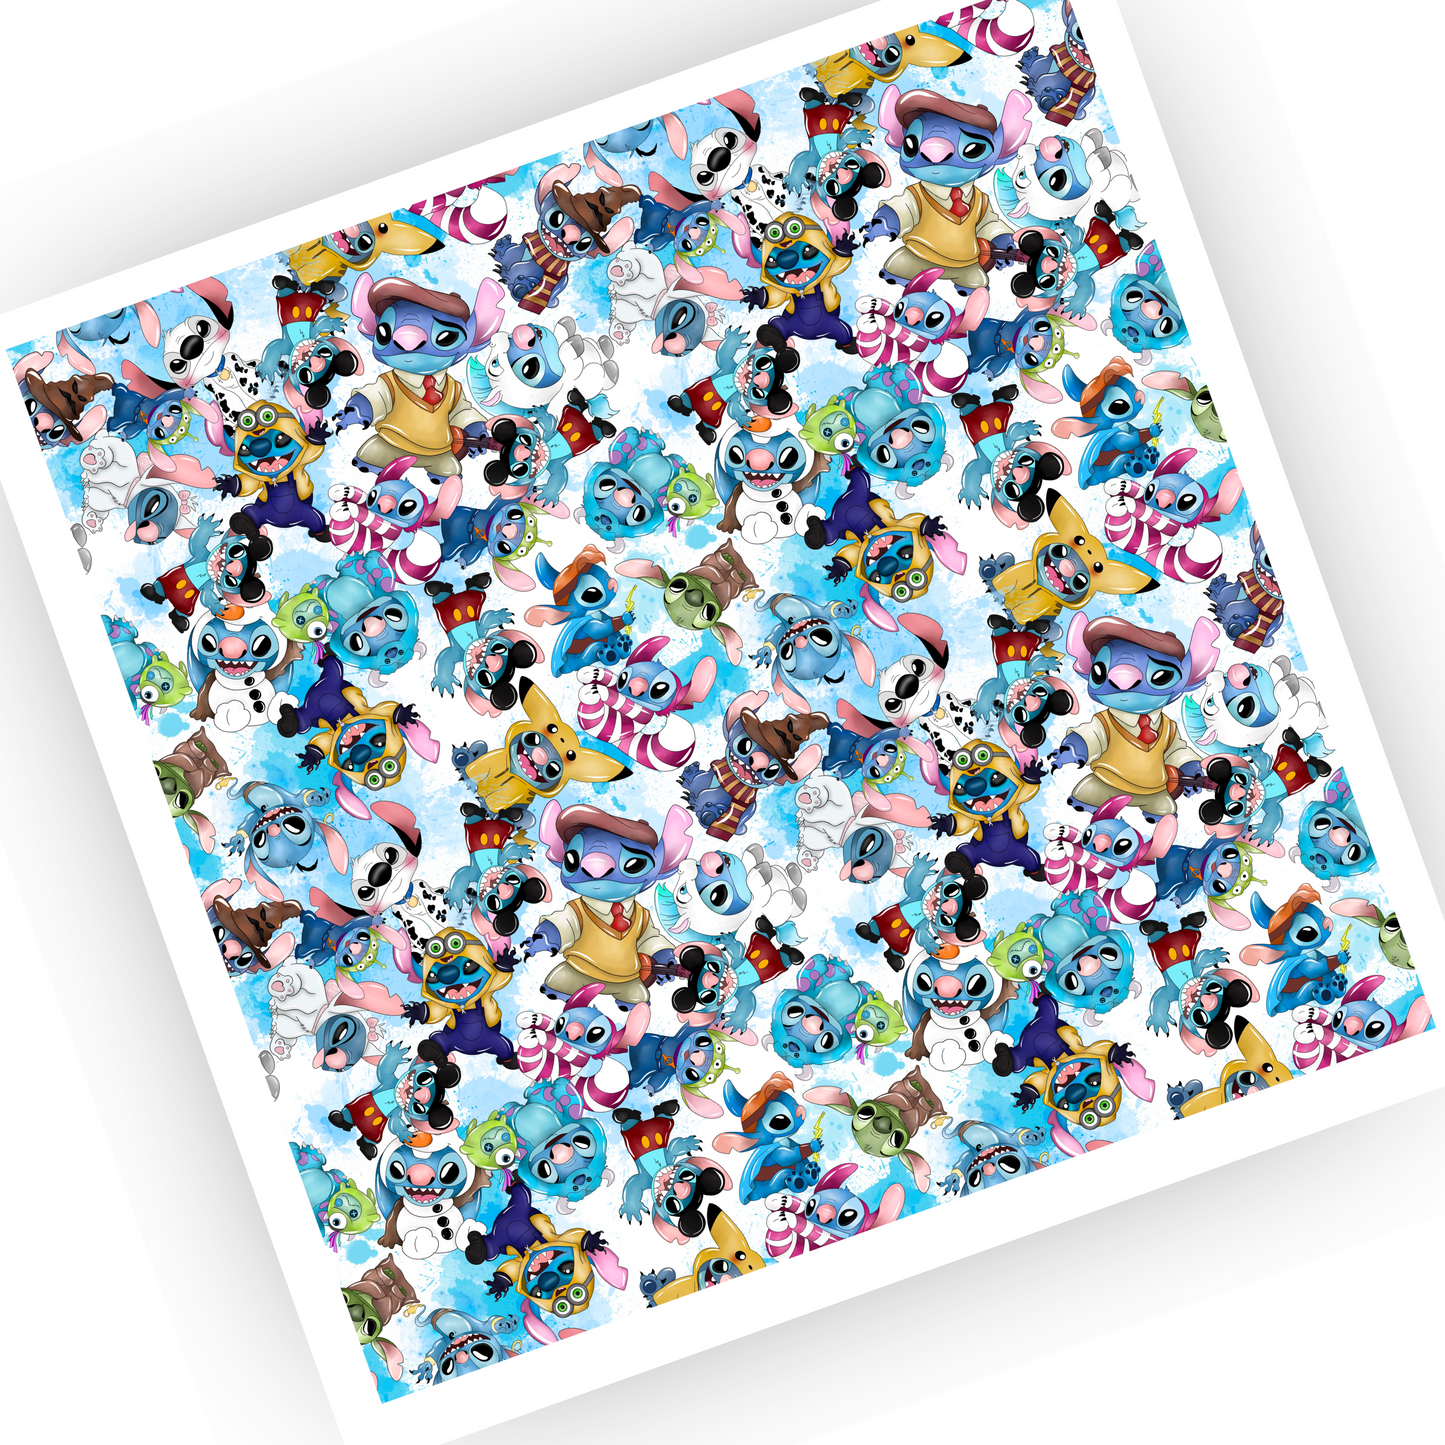 Baby stitchy and friends  Patterned Vinyl